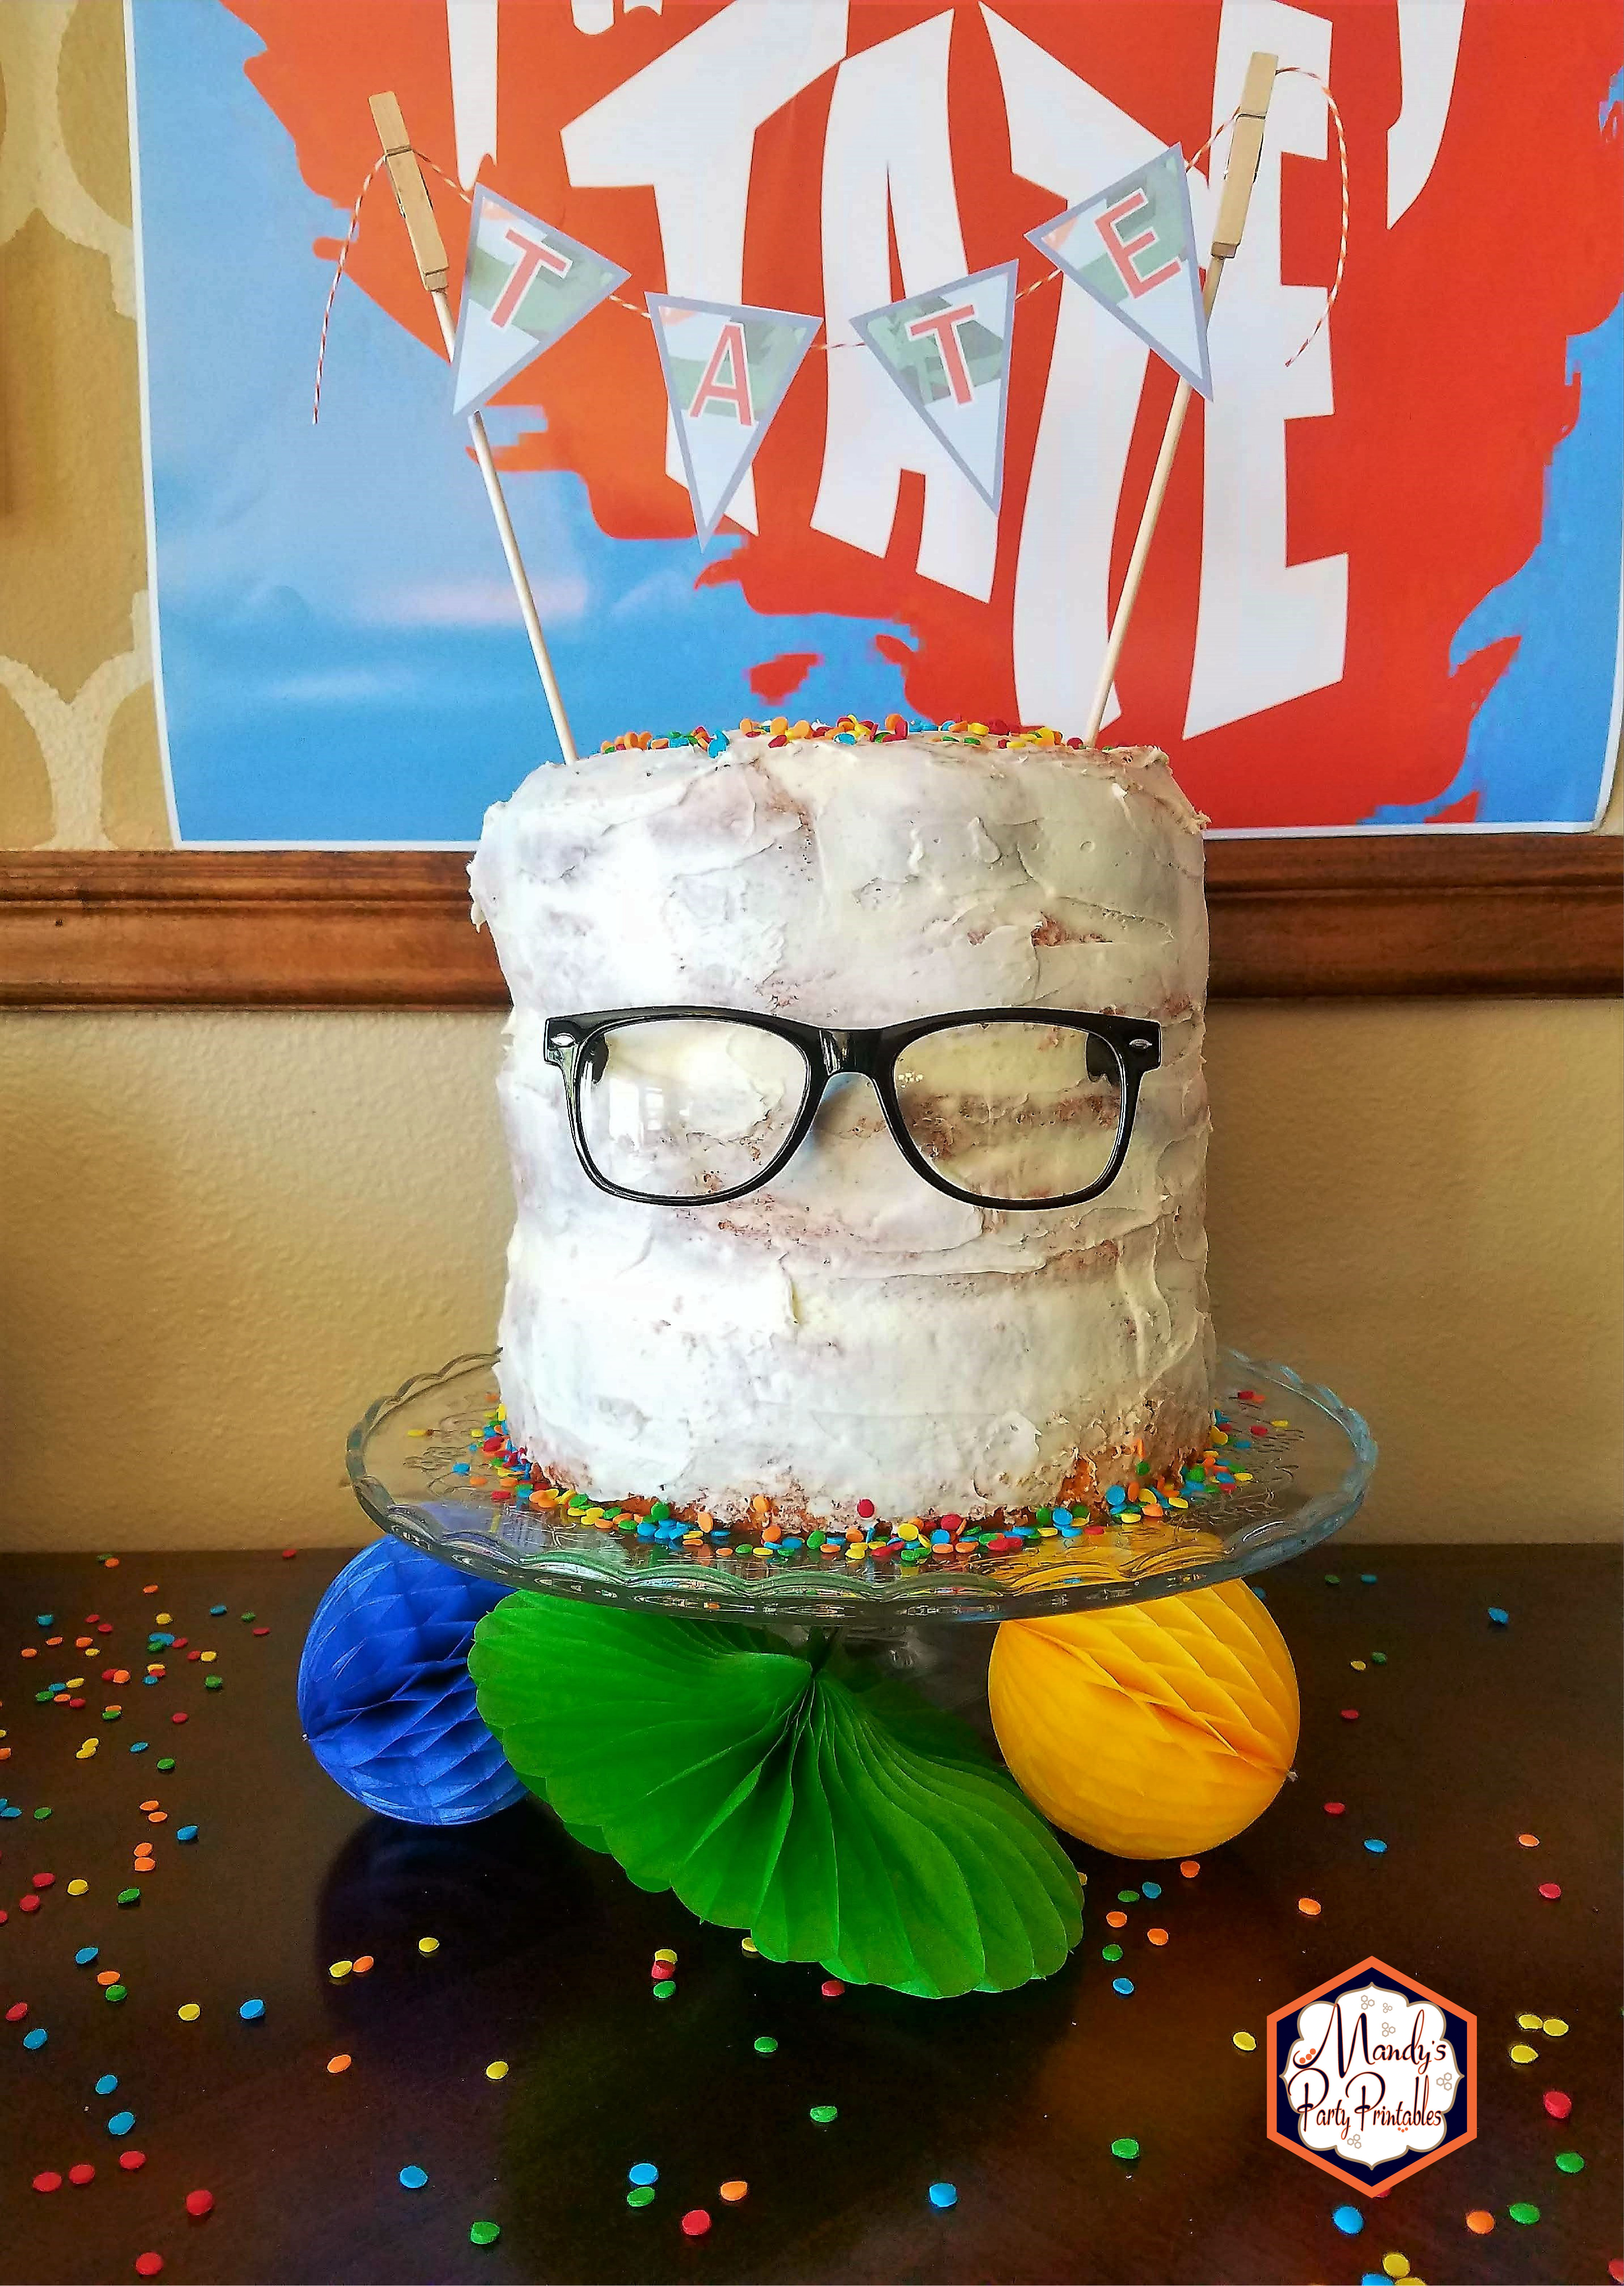 Semi-Naked Link Cake from Good Mythical Morning Inspired Birthday Party via Mandy's Party Printables